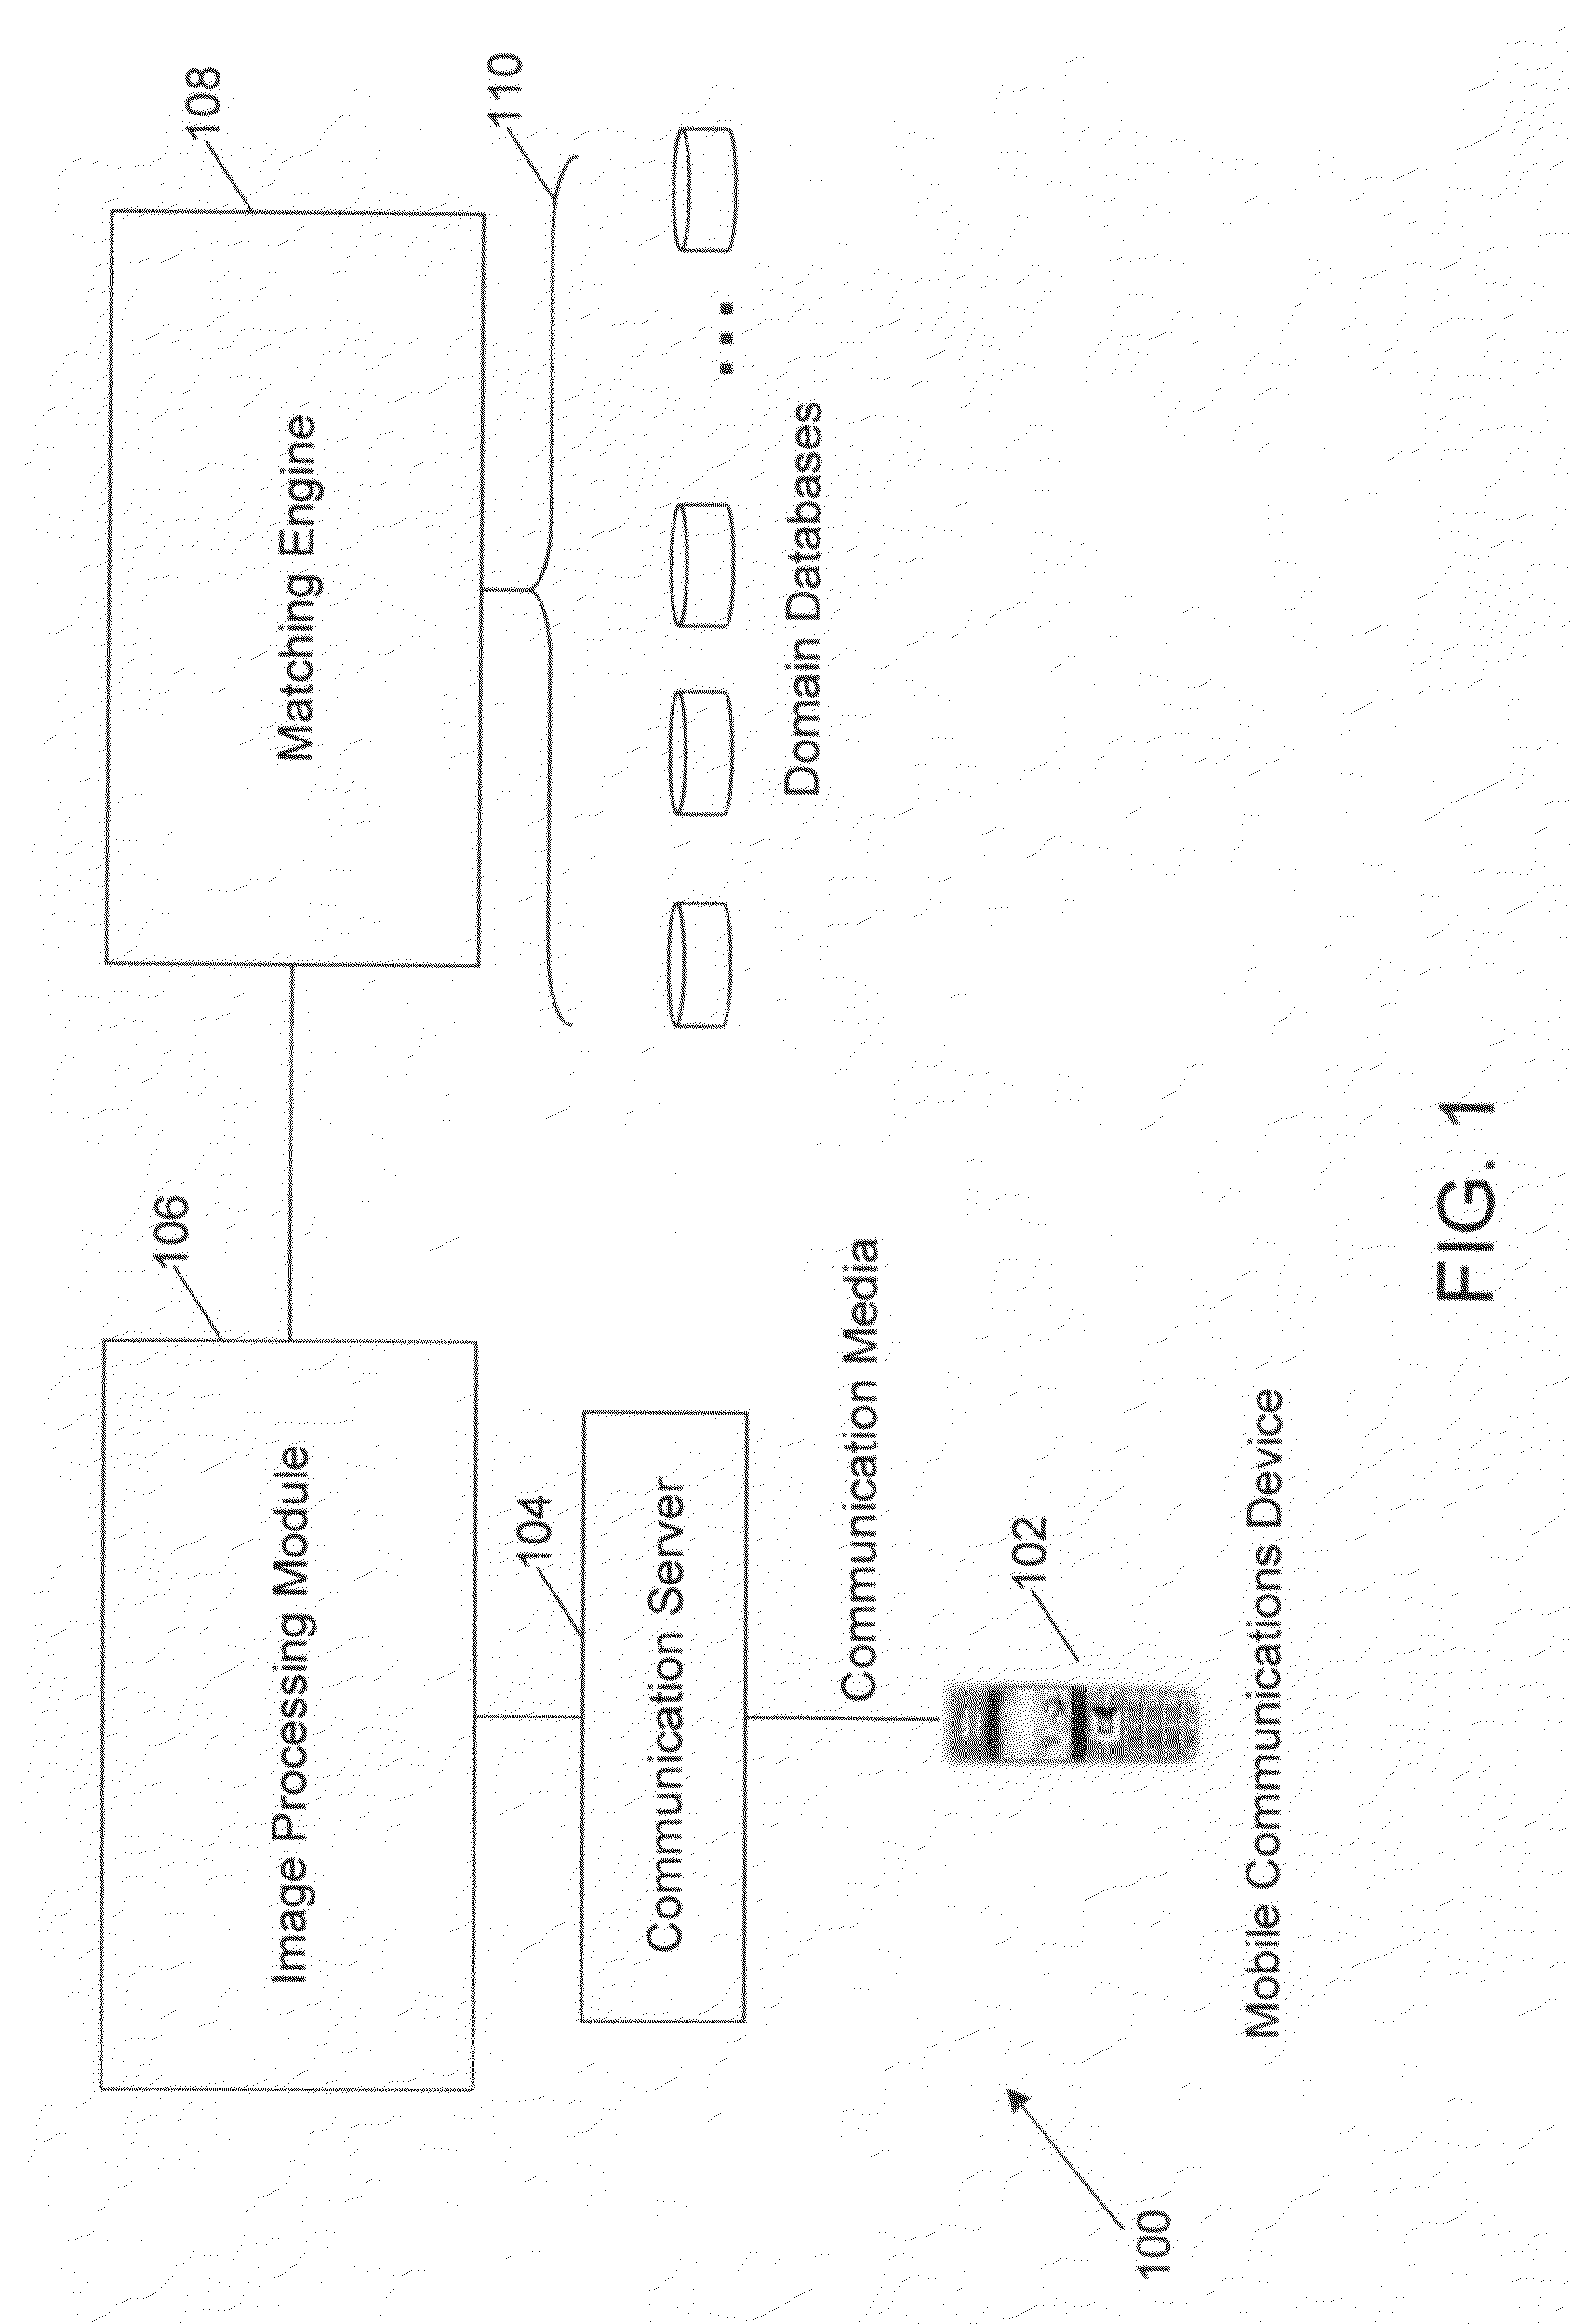 Method and system for searching for information on a network in response to an image query sent by a user from a mobile communications device